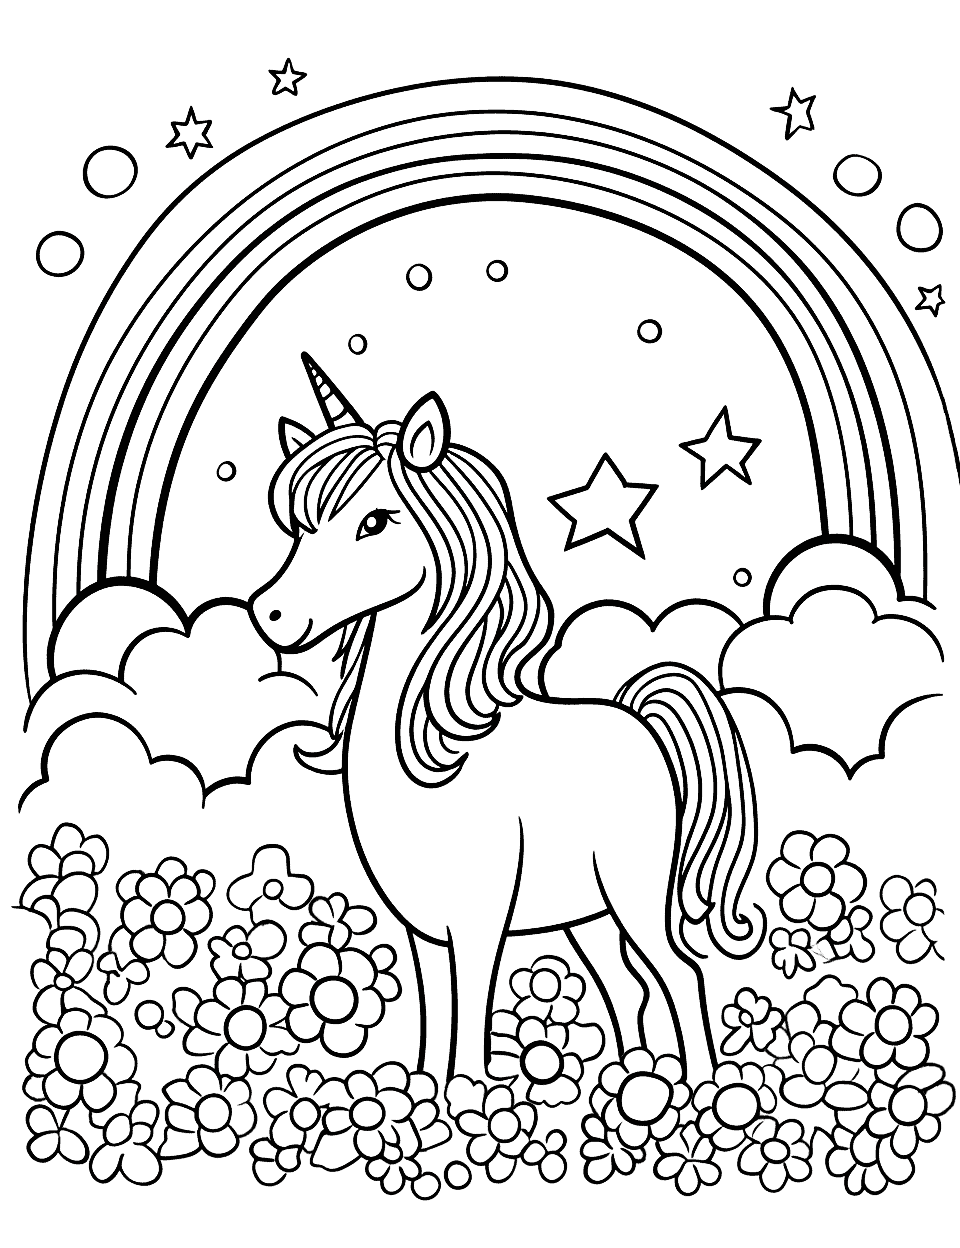 Green Rainbow Friends Coloring Pages Printable for Free Download